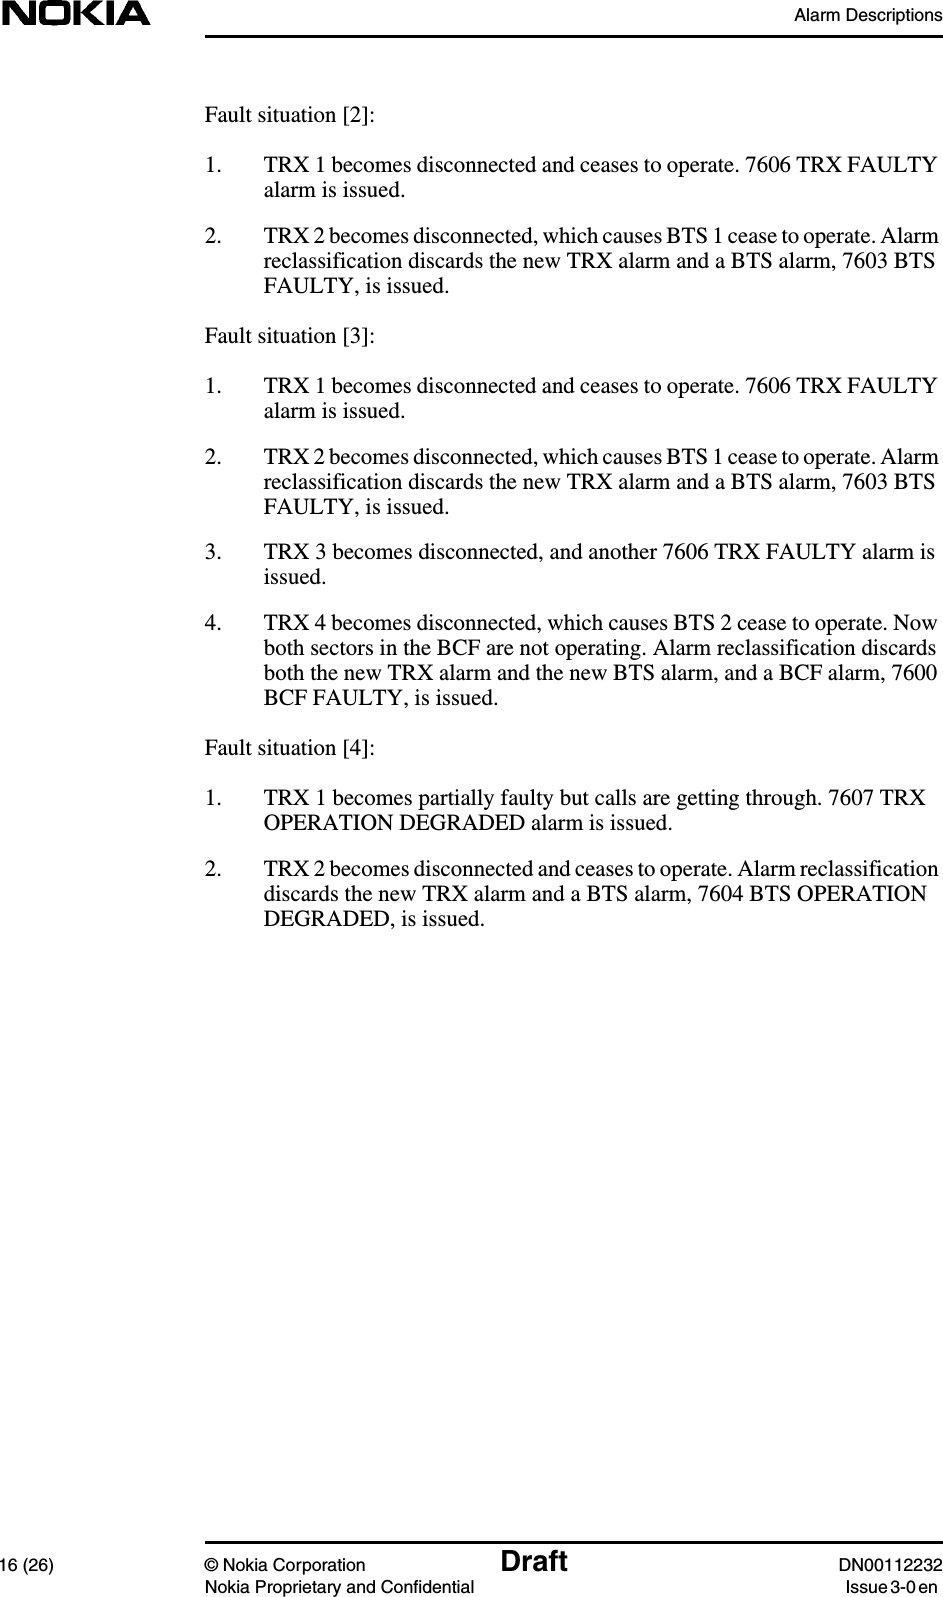 Alarm Descriptions16 (26) © Nokia Corporation Draft DN00112232Nokia Proprietary and Confidential Issue 3-0 enFault situation [2]:1. TRX 1 becomes disconnected and ceases to operate. 7606 TRX FAULTYalarm is issued.2. TRX 2 becomes disconnected, which causes BTS 1 cease to operate. Alarmreclassification discards the new TRX alarm and a BTS alarm, 7603 BTSFAULTY, is issued.Fault situation [3]:1. TRX 1 becomes disconnected and ceases to operate. 7606 TRX FAULTYalarm is issued.2. TRX 2 becomes disconnected, which causes BTS 1 cease to operate. Alarmreclassification discards the new TRX alarm and a BTS alarm, 7603 BTSFAULTY, is issued.3. TRX 3 becomes disconnected, and another 7606 TRX FAULTY alarm isissued.4. TRX 4 becomes disconnected, which causes BTS 2 cease to operate. Nowboth sectors in the BCF are not operating. Alarm reclassification discardsboth the new TRX alarm and the new BTS alarm, and a BCF alarm, 7600BCF FAULTY, is issued.Fault situation [4]:1. TRX 1 becomes partially faulty but calls are getting through. 7607 TRXOPERATION DEGRADED alarm is issued.2. TRX 2 becomes disconnected and ceases to operate. Alarm reclassificationdiscards the new TRX alarm and a BTS alarm, 7604 BTS OPERATIONDEGRADED, is issued.